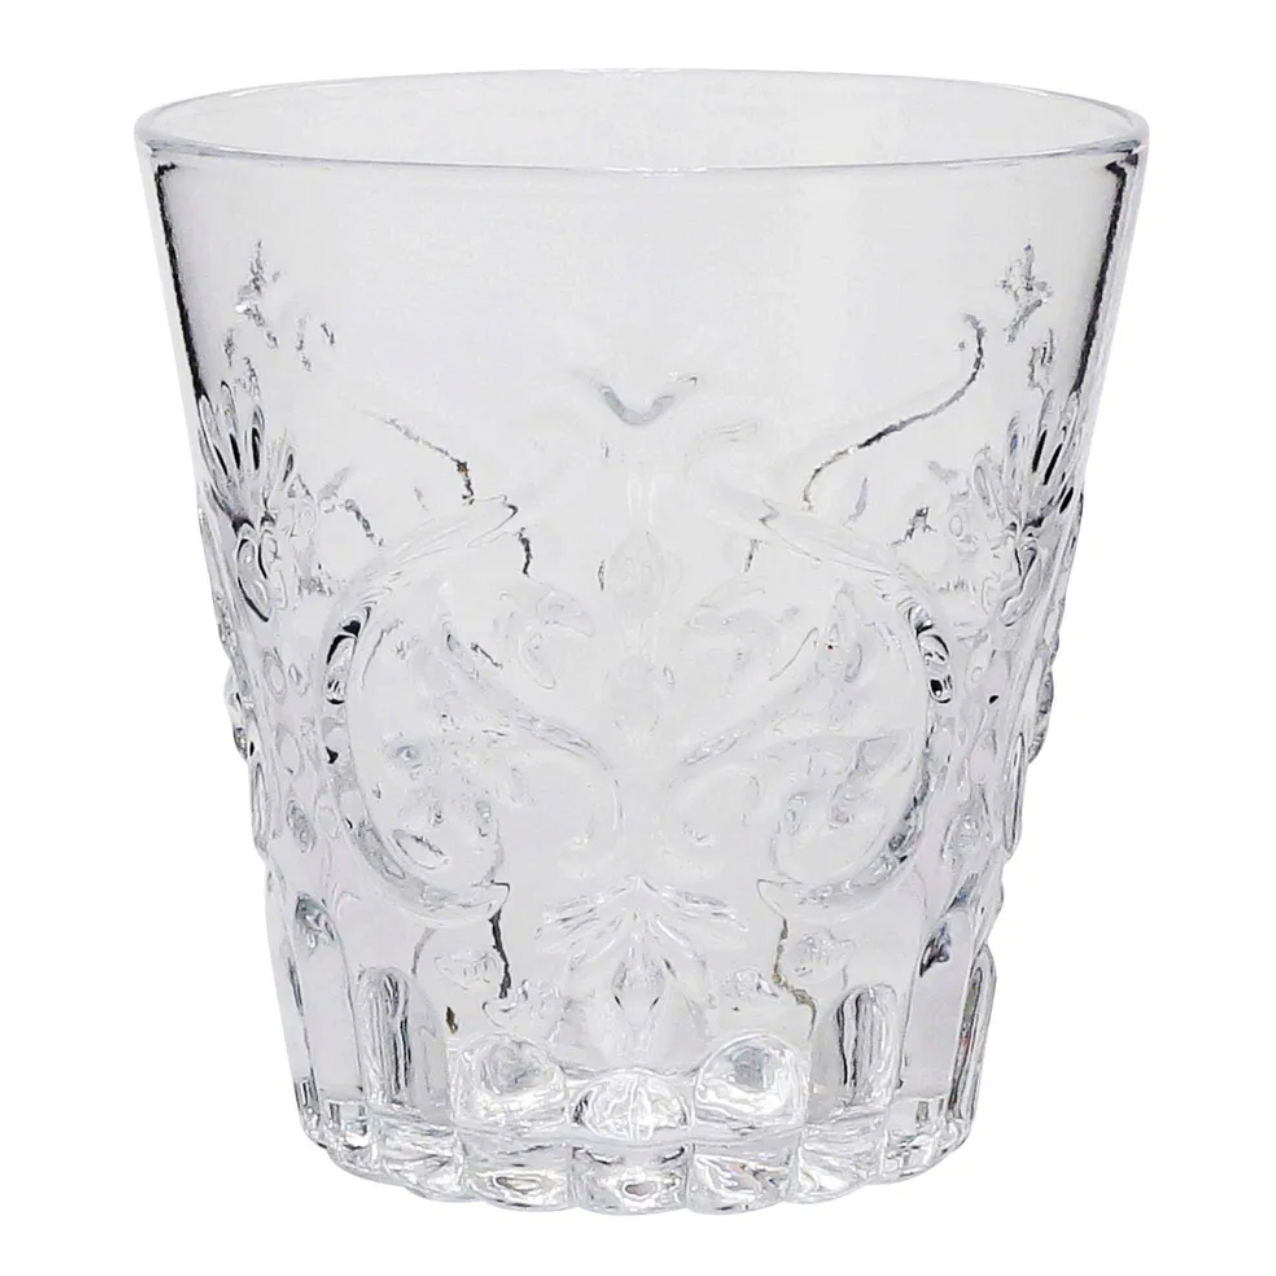 DRINKING GLASS SET OF 4 VALENTIA CLEAR 8OZ